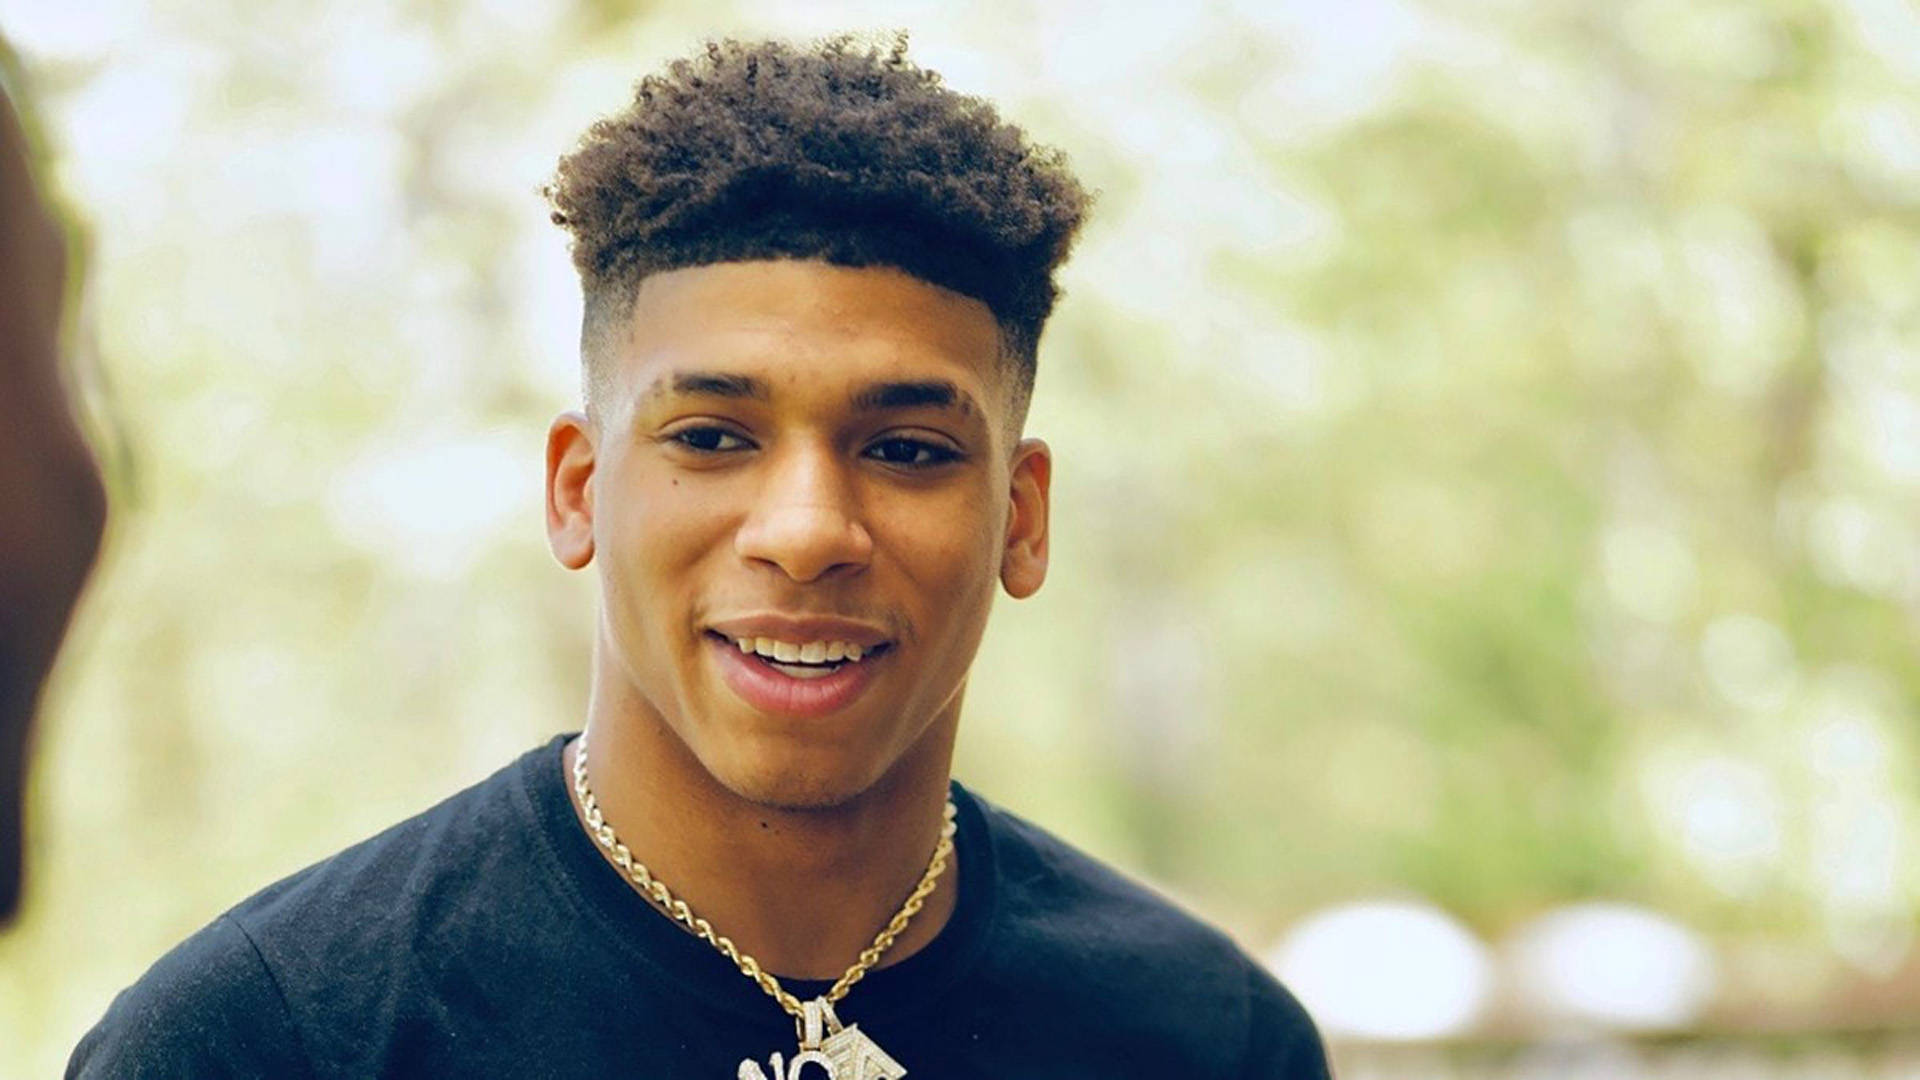 NLE Choppa with a Bright Smile Wallpaper